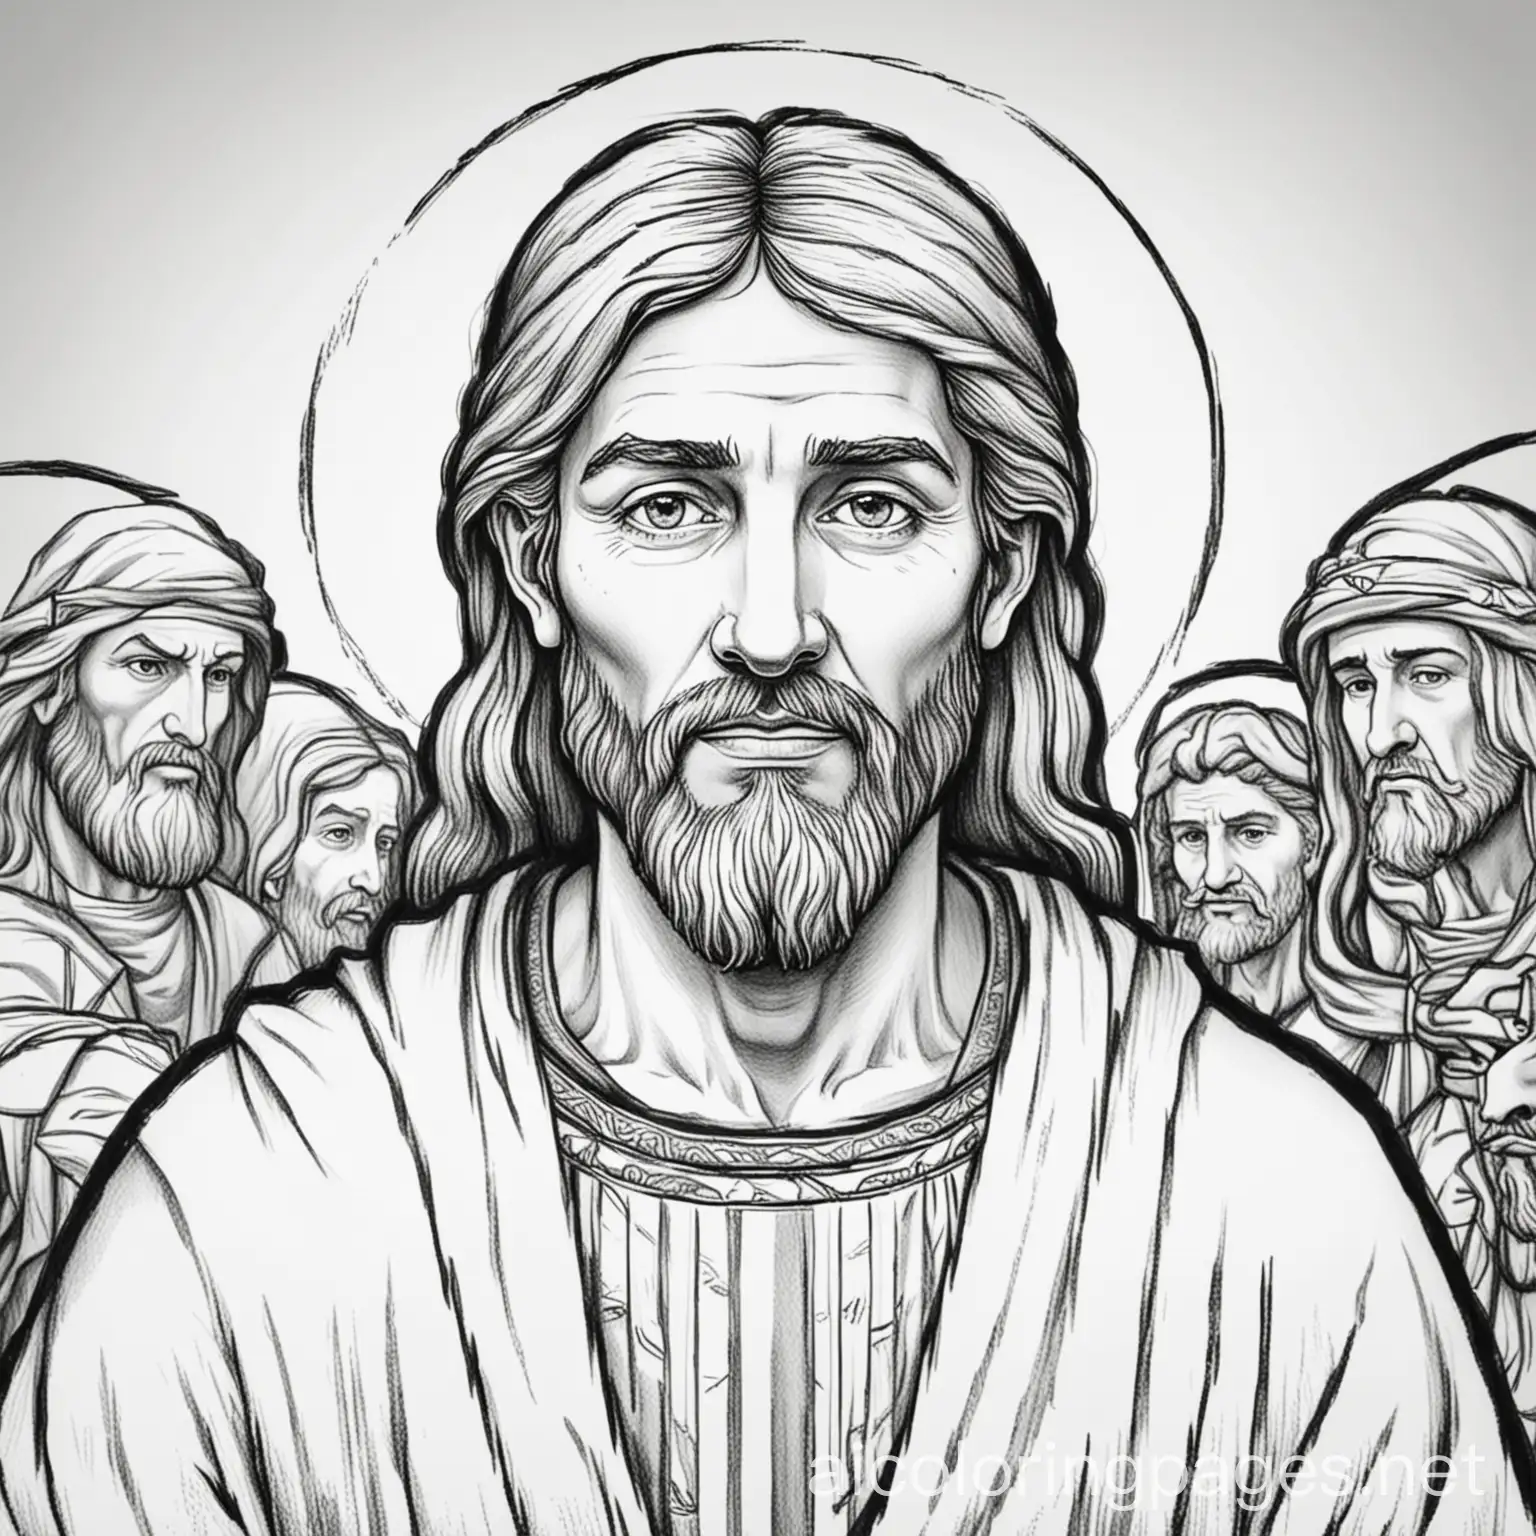 Simon the disciple of Jesus of the bible black and white coloring page, Coloring Page, black and white, line art, white background, Simplicity, Ample White Space.